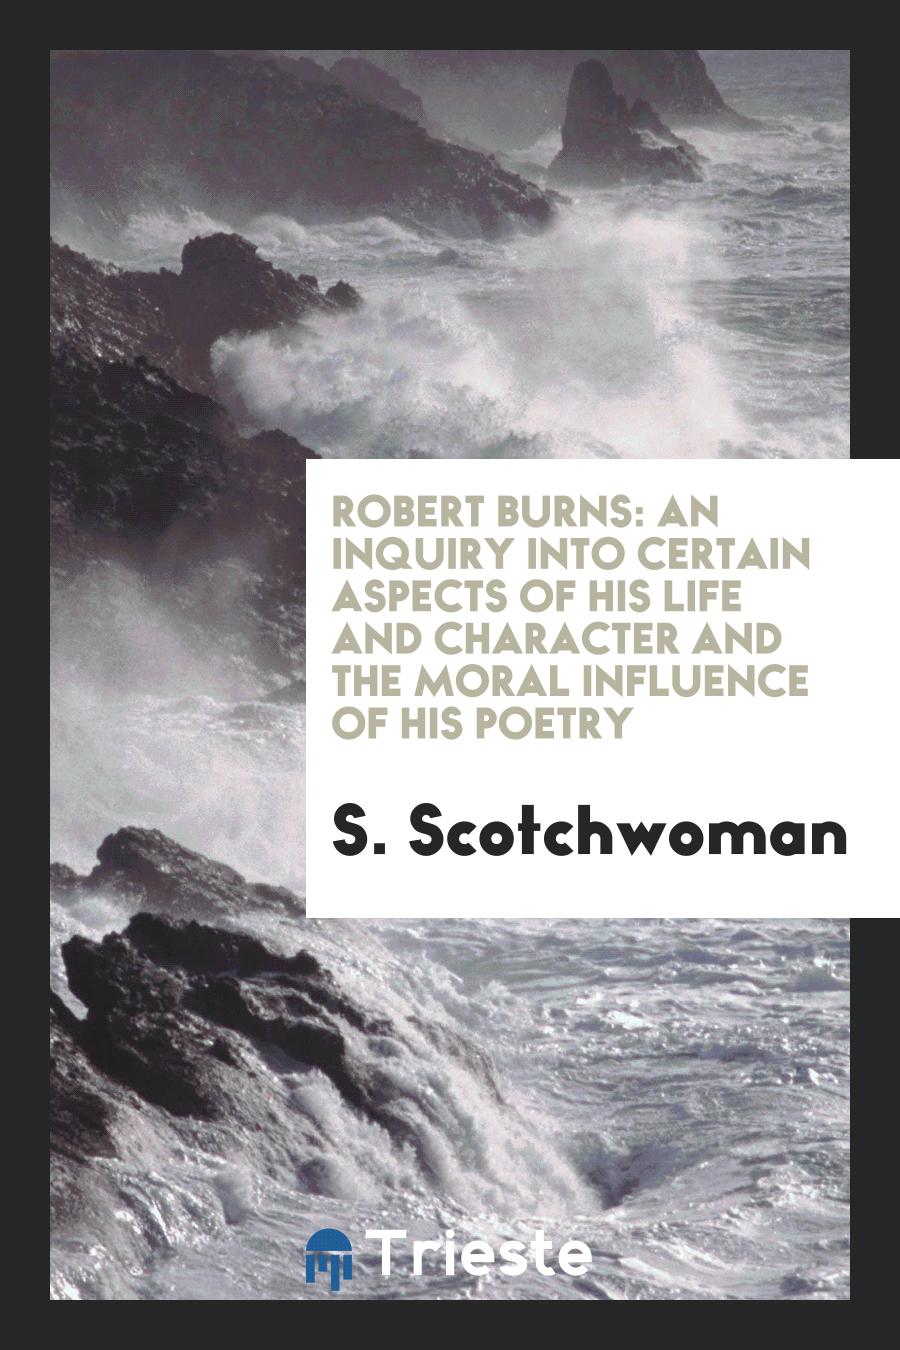 Robert Burns: An Inquiry Into Certain Aspects of His Life and Character and the Moral Influence of his poetry